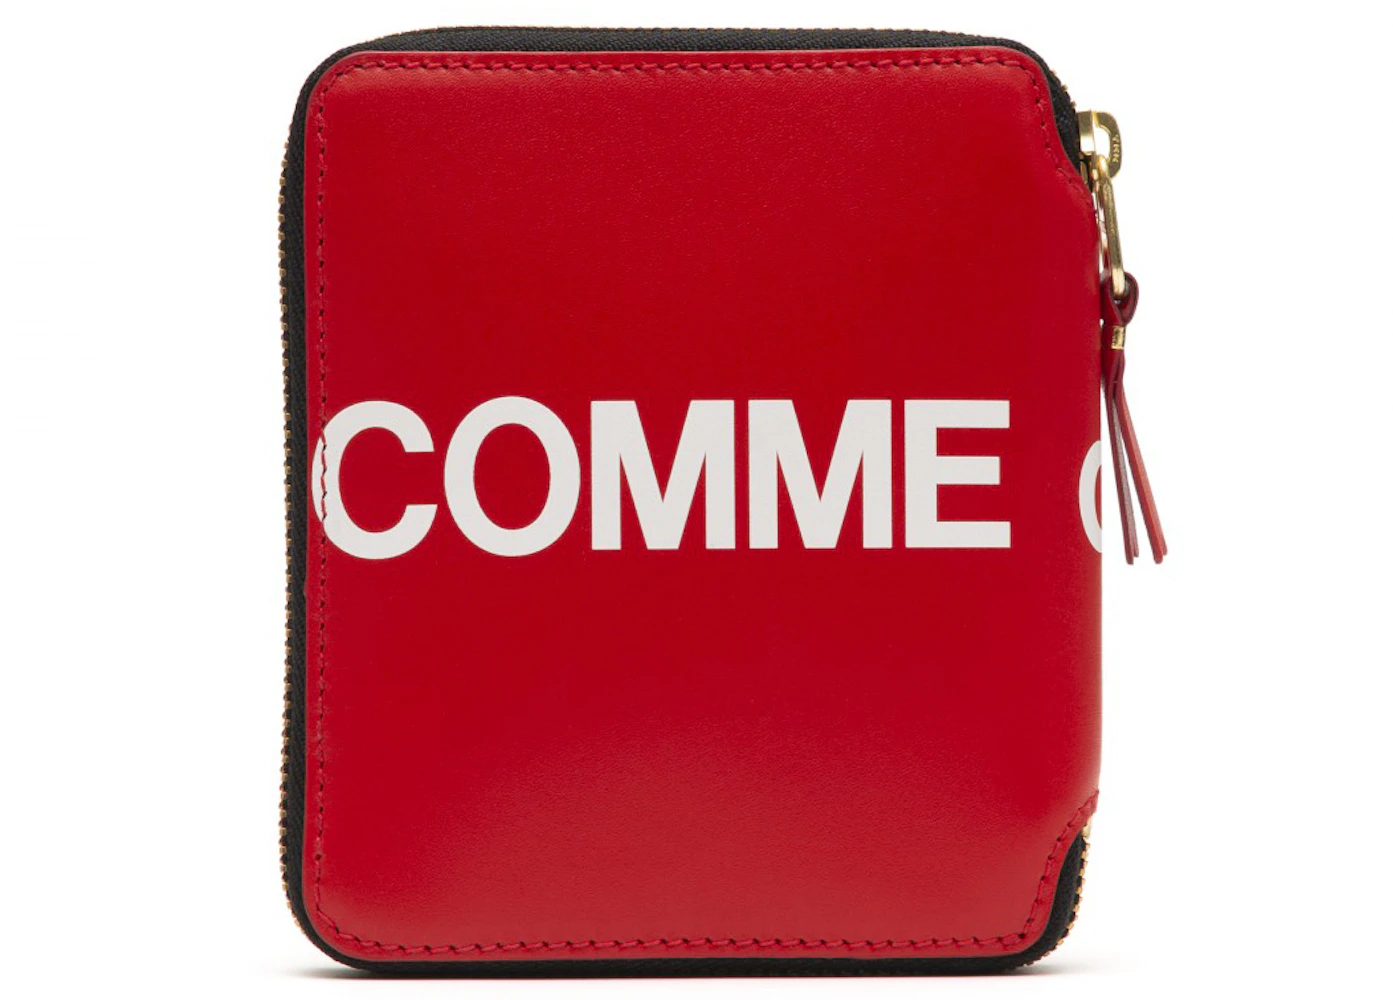 Comme des Garcons SA2100HL Huge Logo Wallet Red in Leather with Gold ...